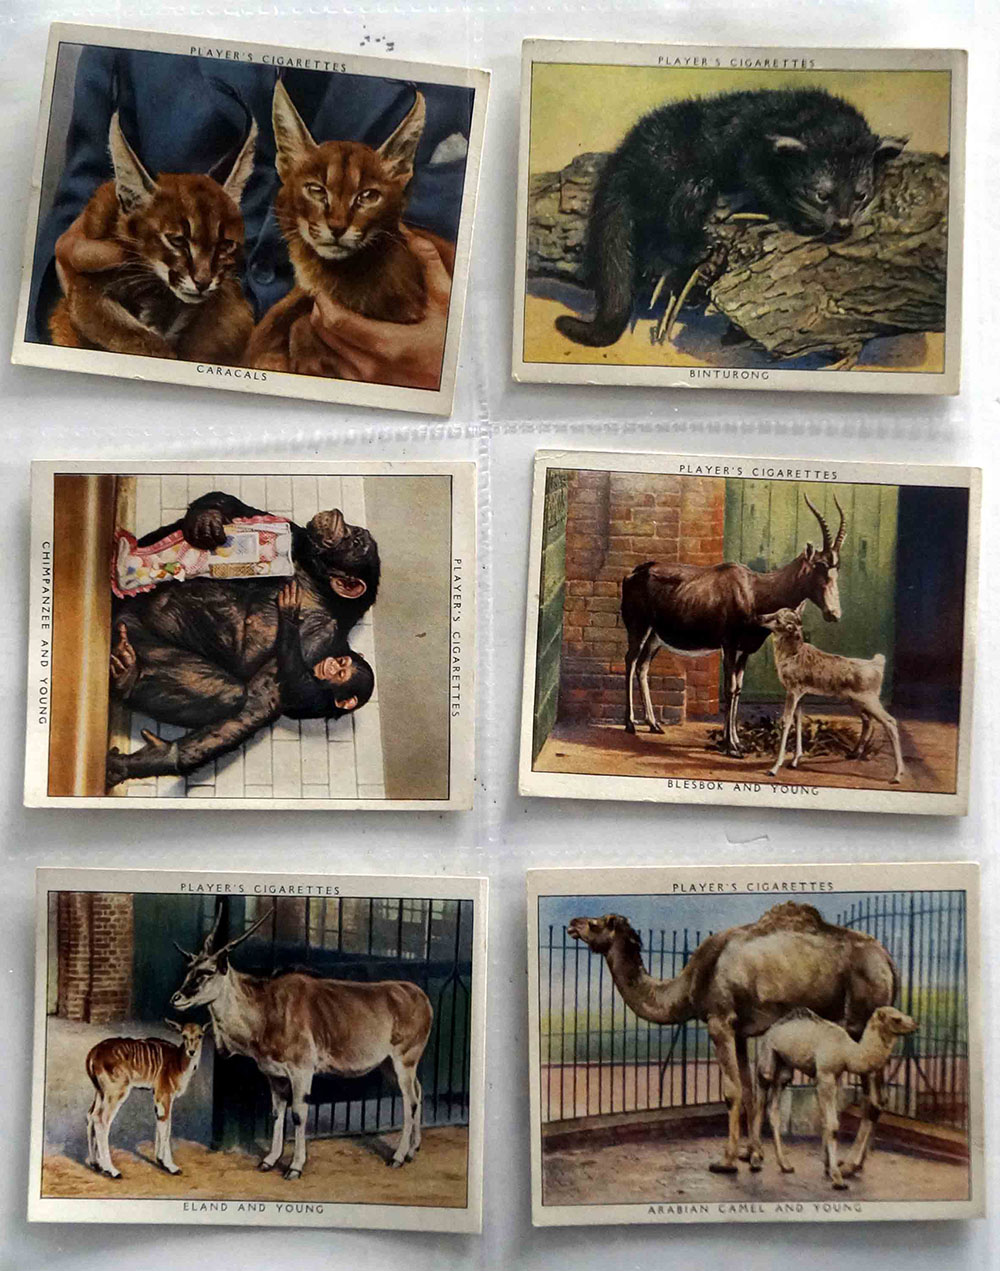 Full Set of 25 Cigarette Cards: Zoo Babies (1938) art by Natural History (Wildlife) at The Illustration Art Gallery